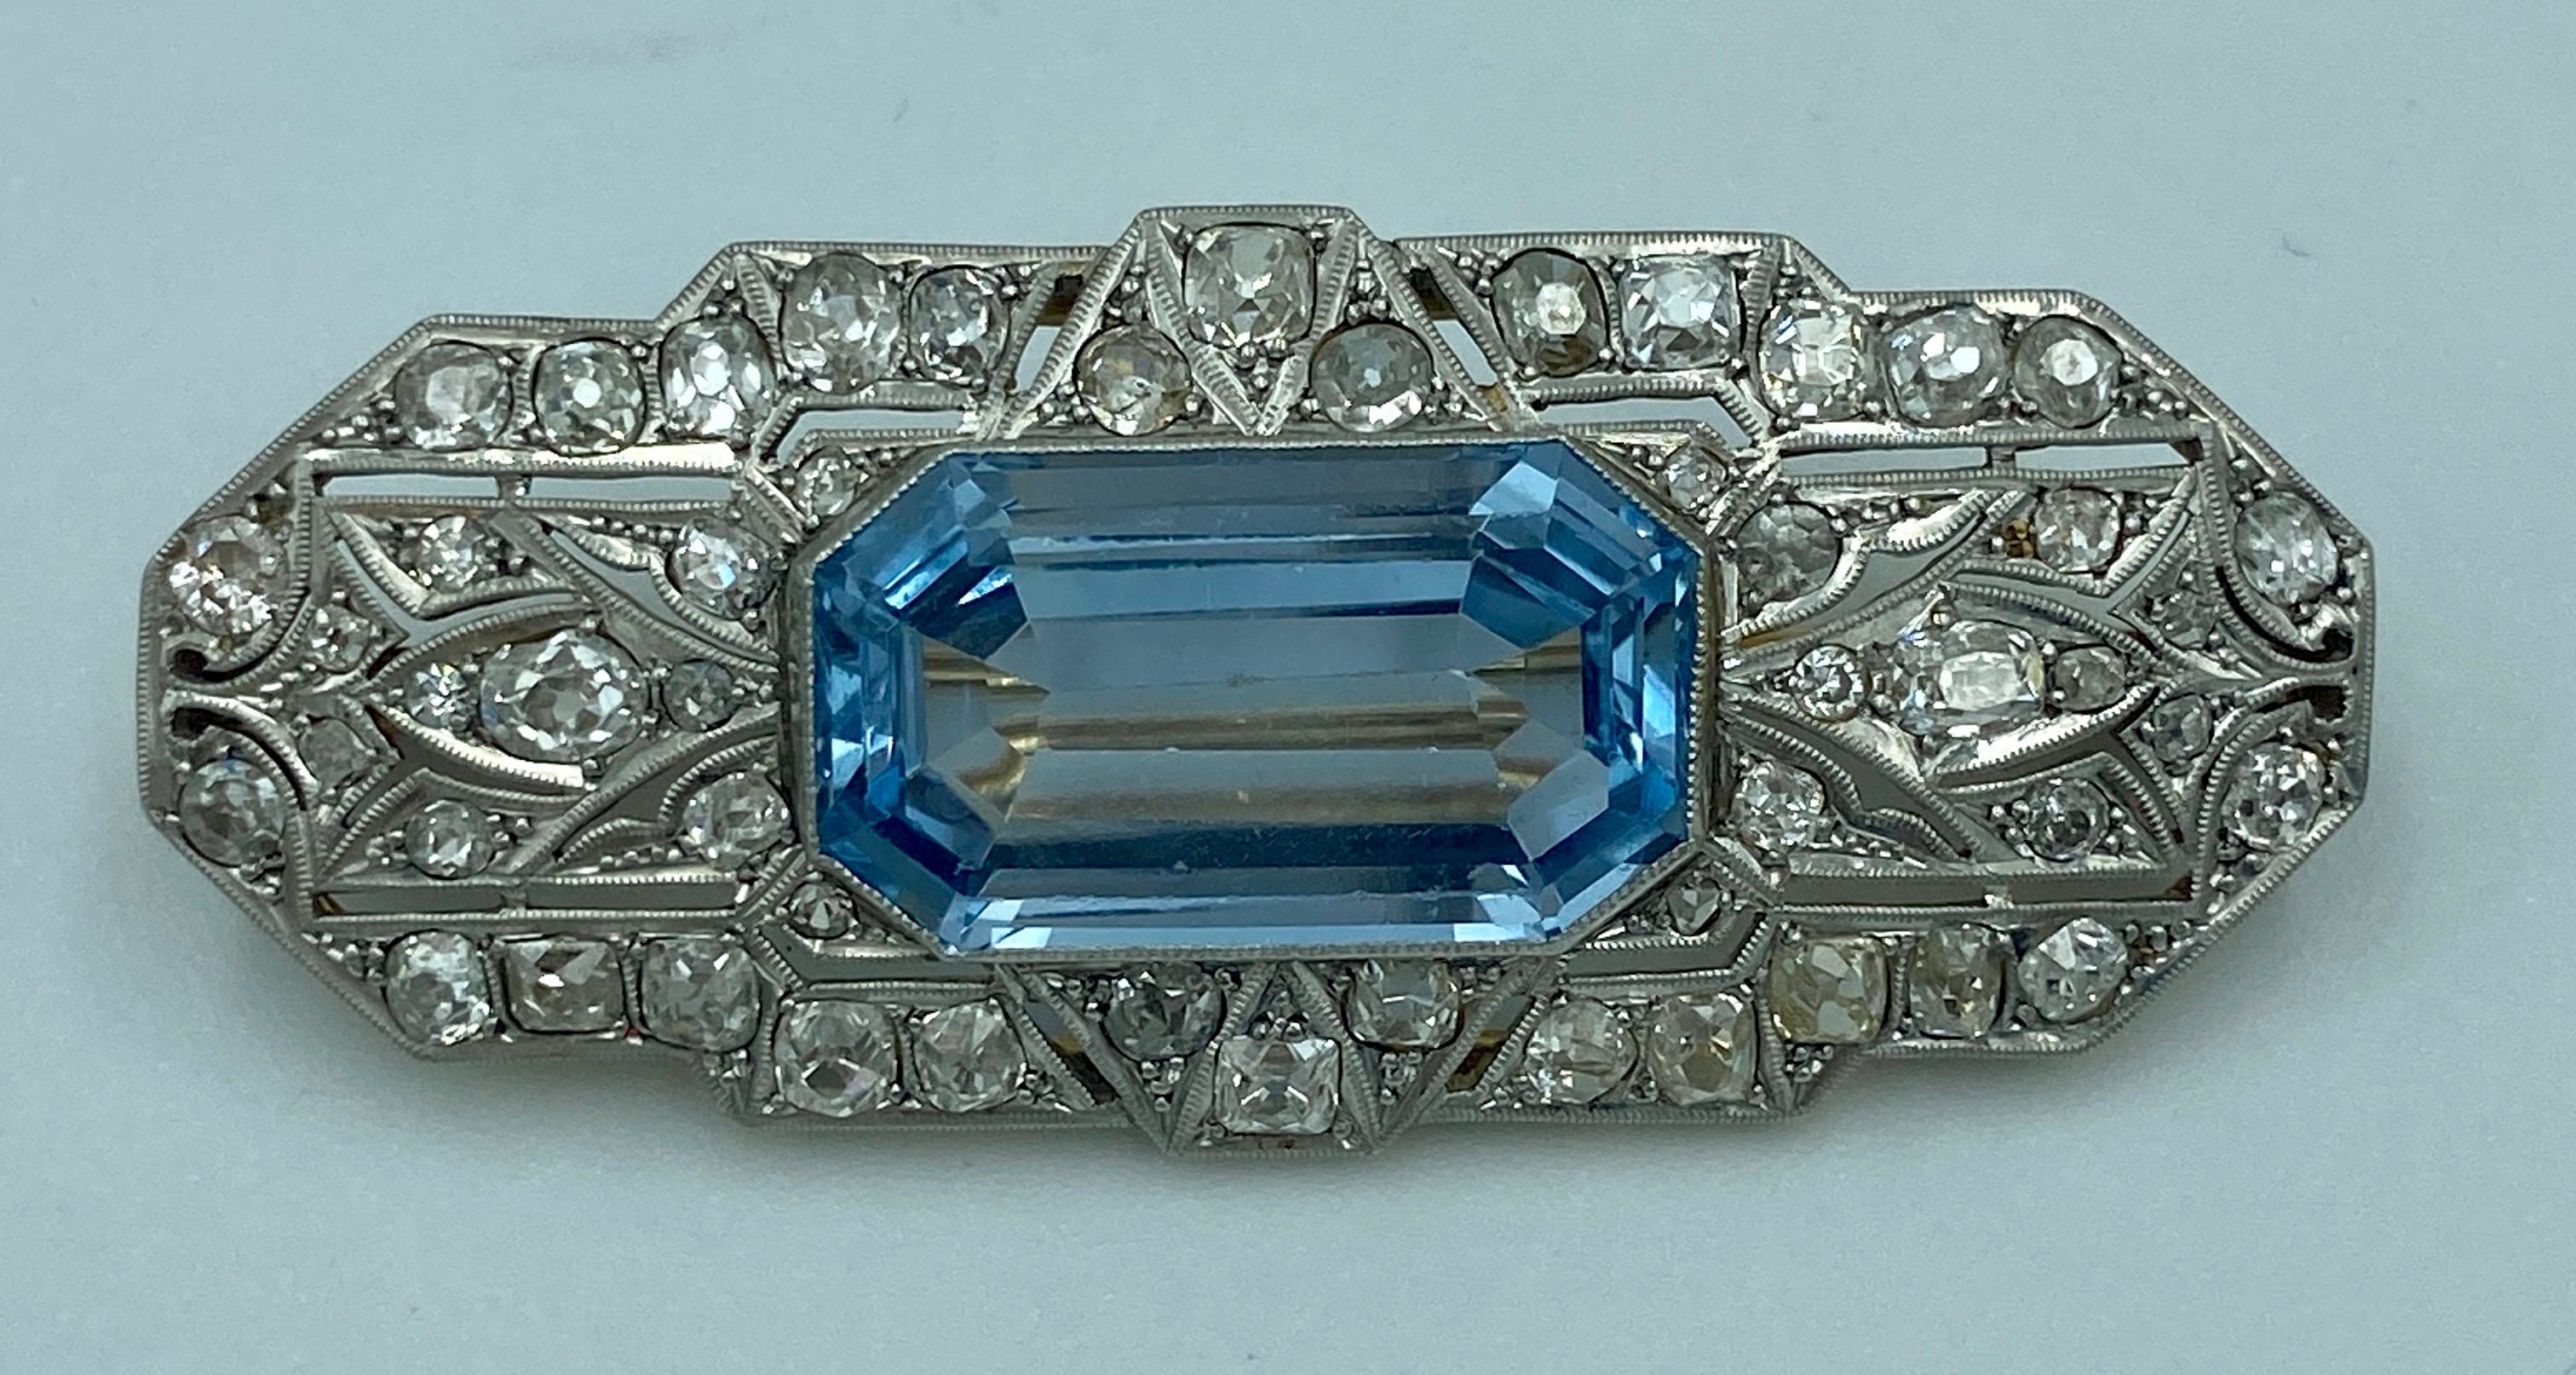 An outstanding piece of Art Deco elegance, this brooch has a central modified emerald cut aquamarine of approx. 9 carats and old mine cut diamonds measuring approx 4 carats. The stones are set in platinum while the back of the brooch is 18 carat